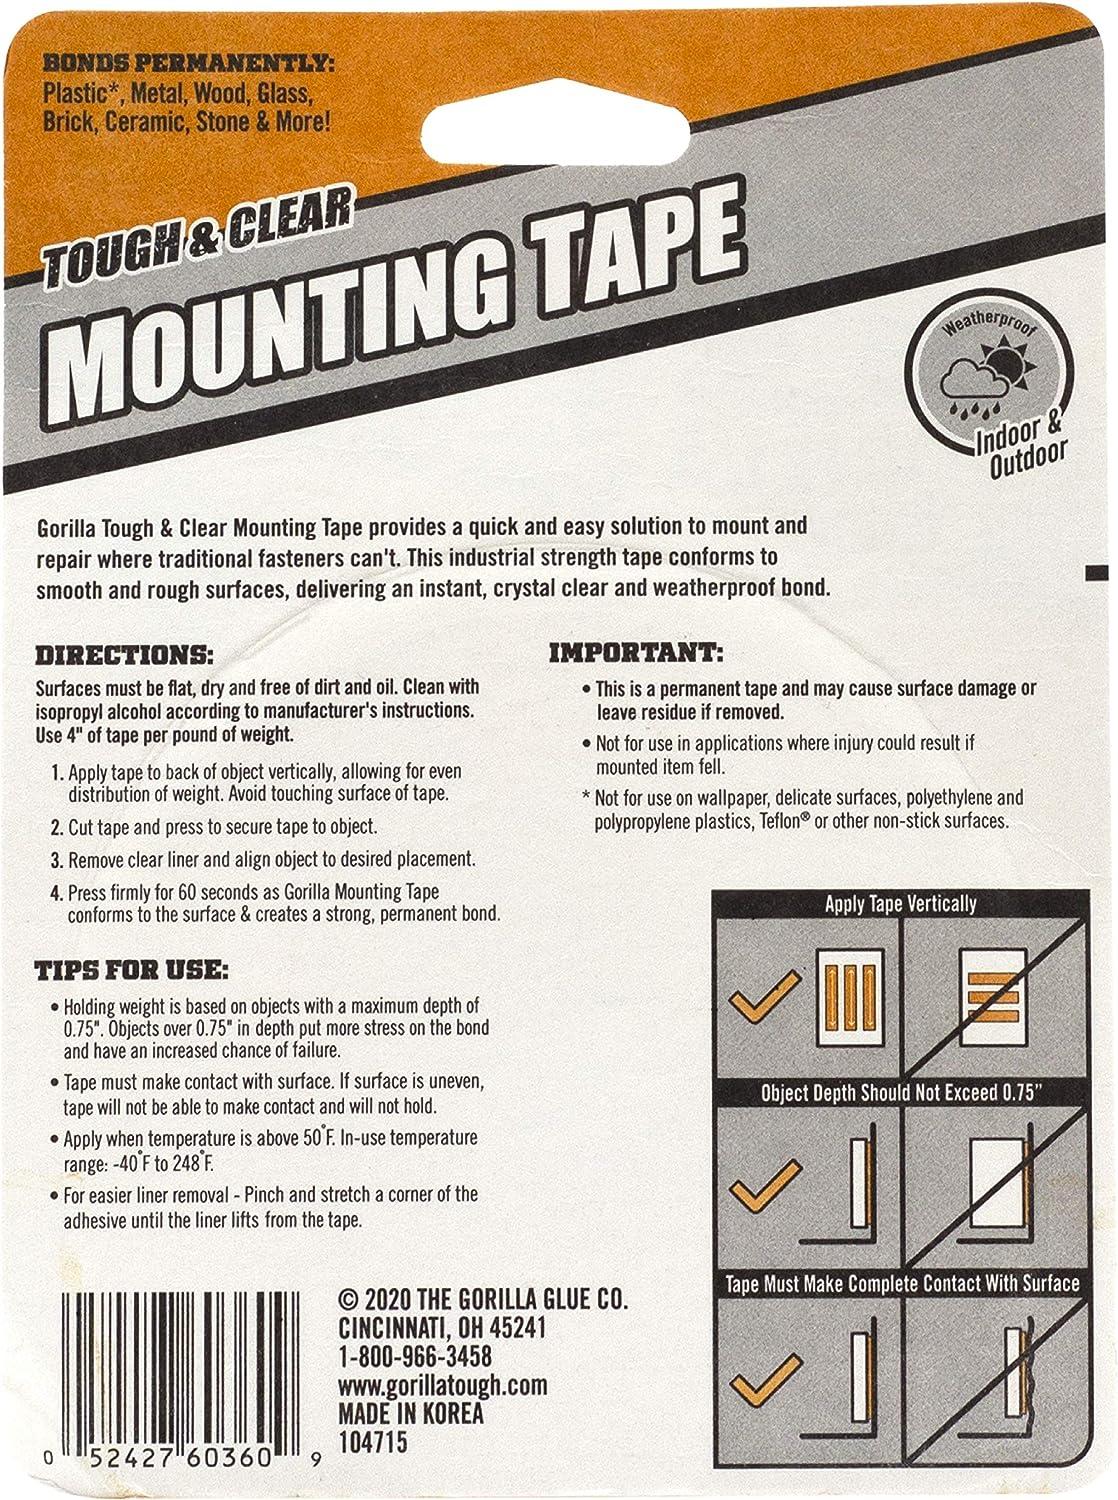 Gorilla Tough and Clear Mounting Tape 1-in x 150-in Double-Sided